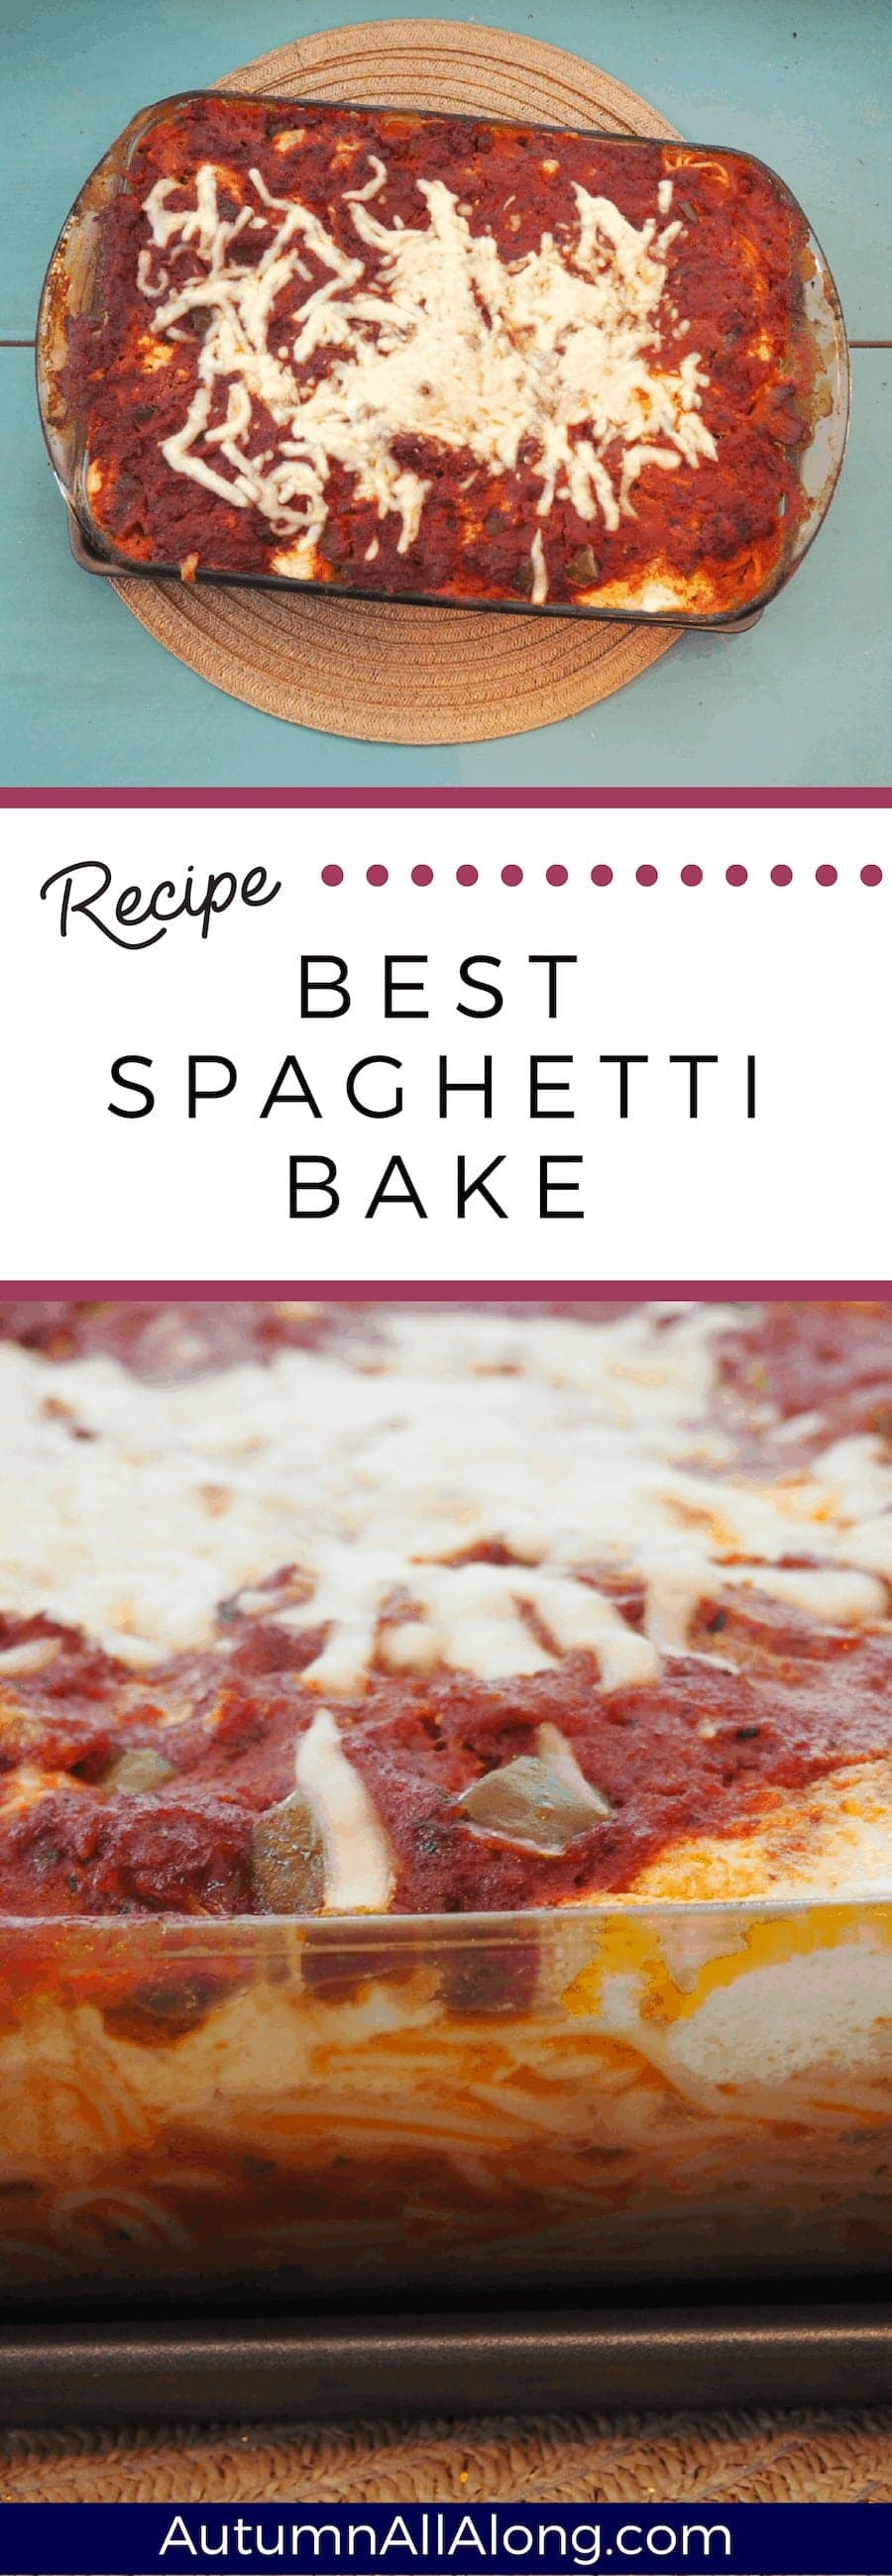 I've been looking for the best spaghetti bake casserole recipe around for a while. After making this several times, I'm so excited to share this yumminess! | via Autumn All Along